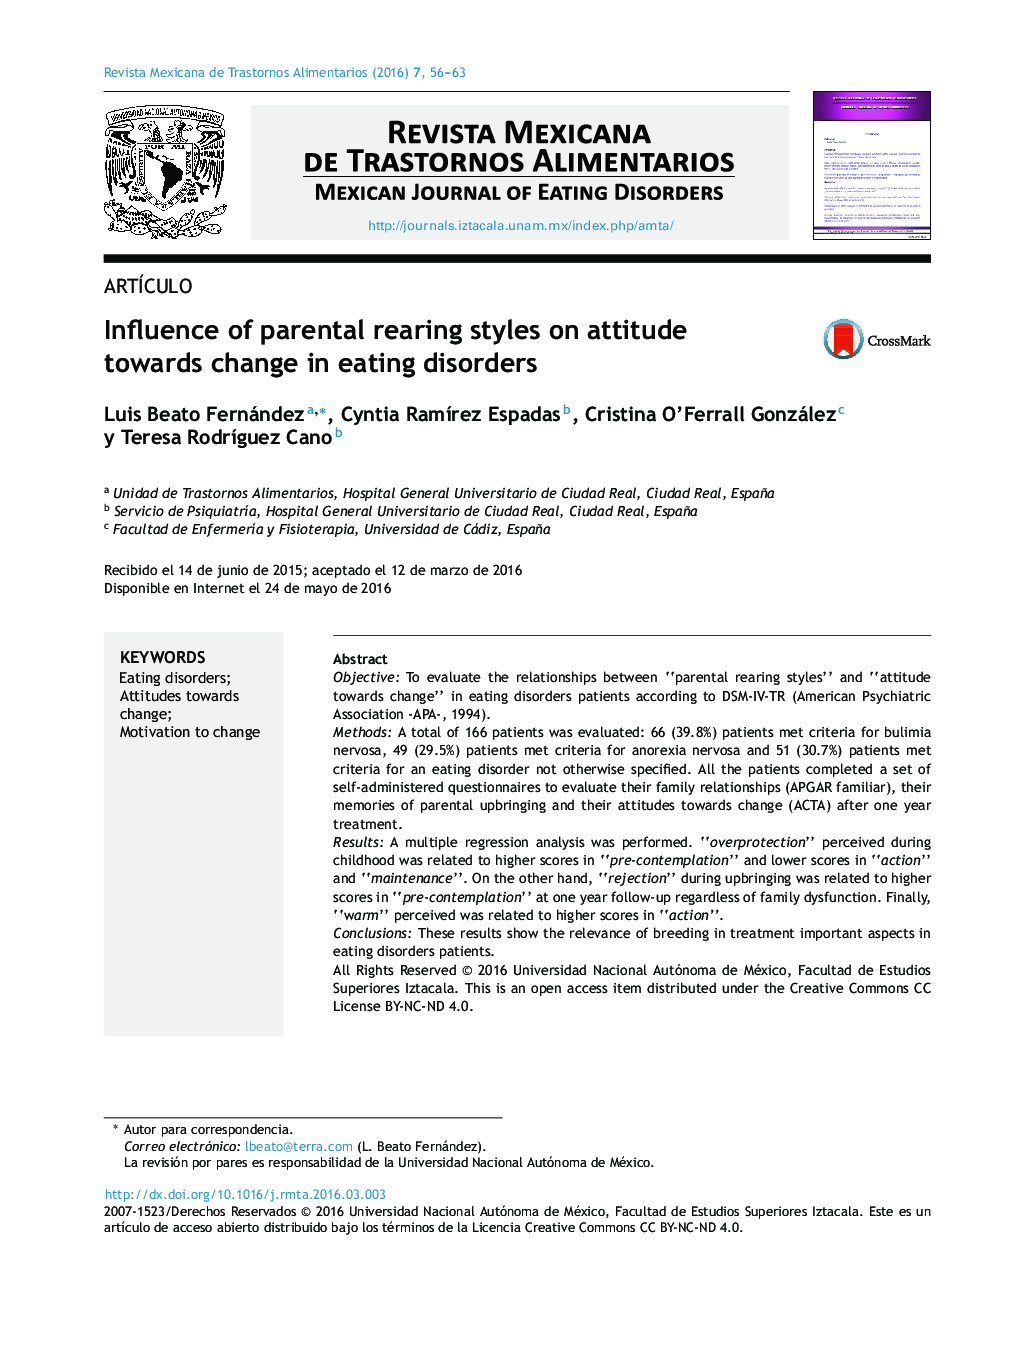 Influence of parental rearing styles on attitude towards change in eating disorders 